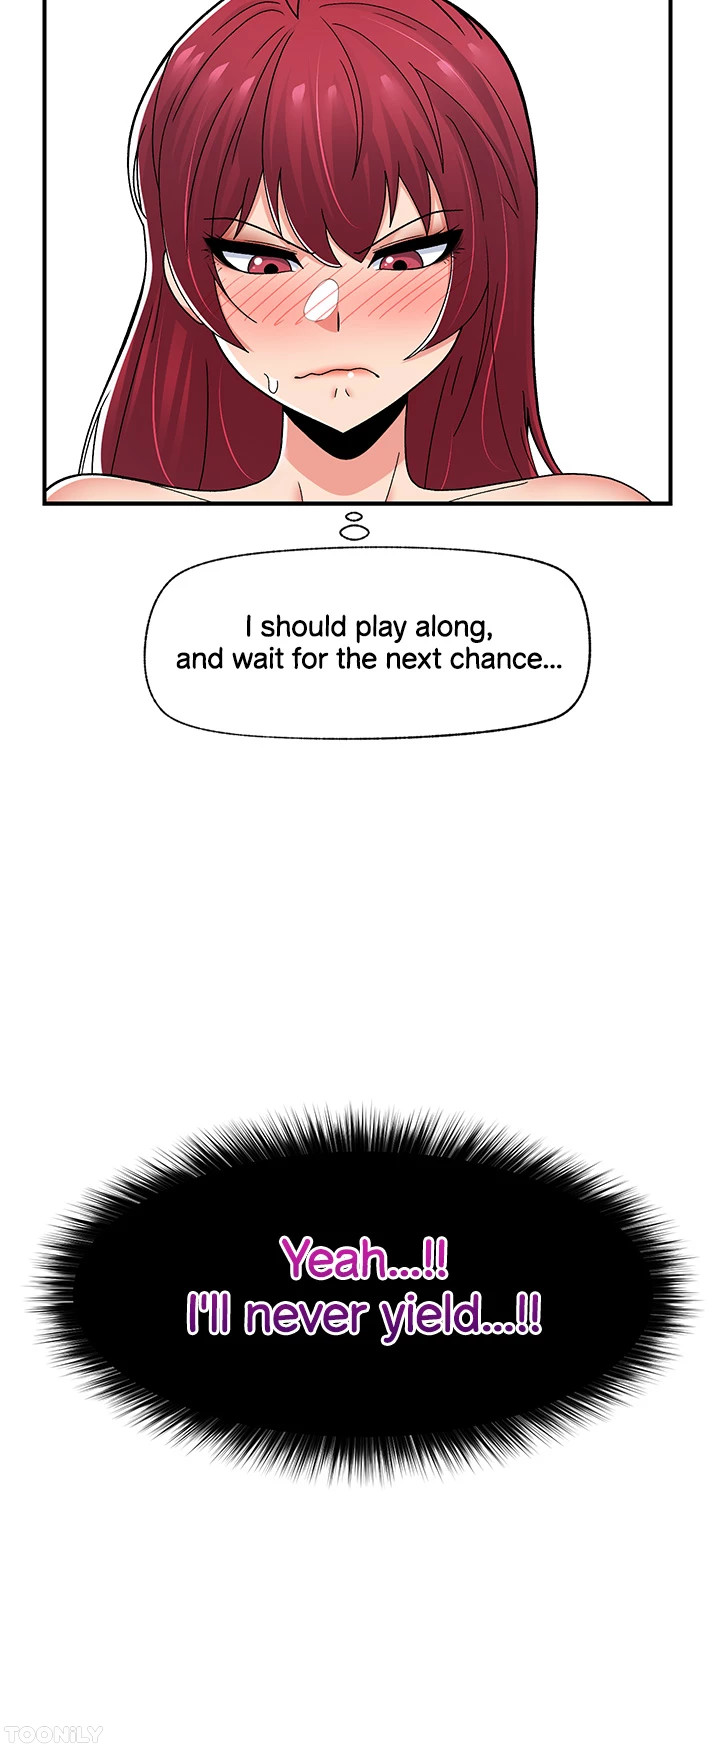 Absolute Hypnosis in Another World Chapter 67 - HolyManga.net